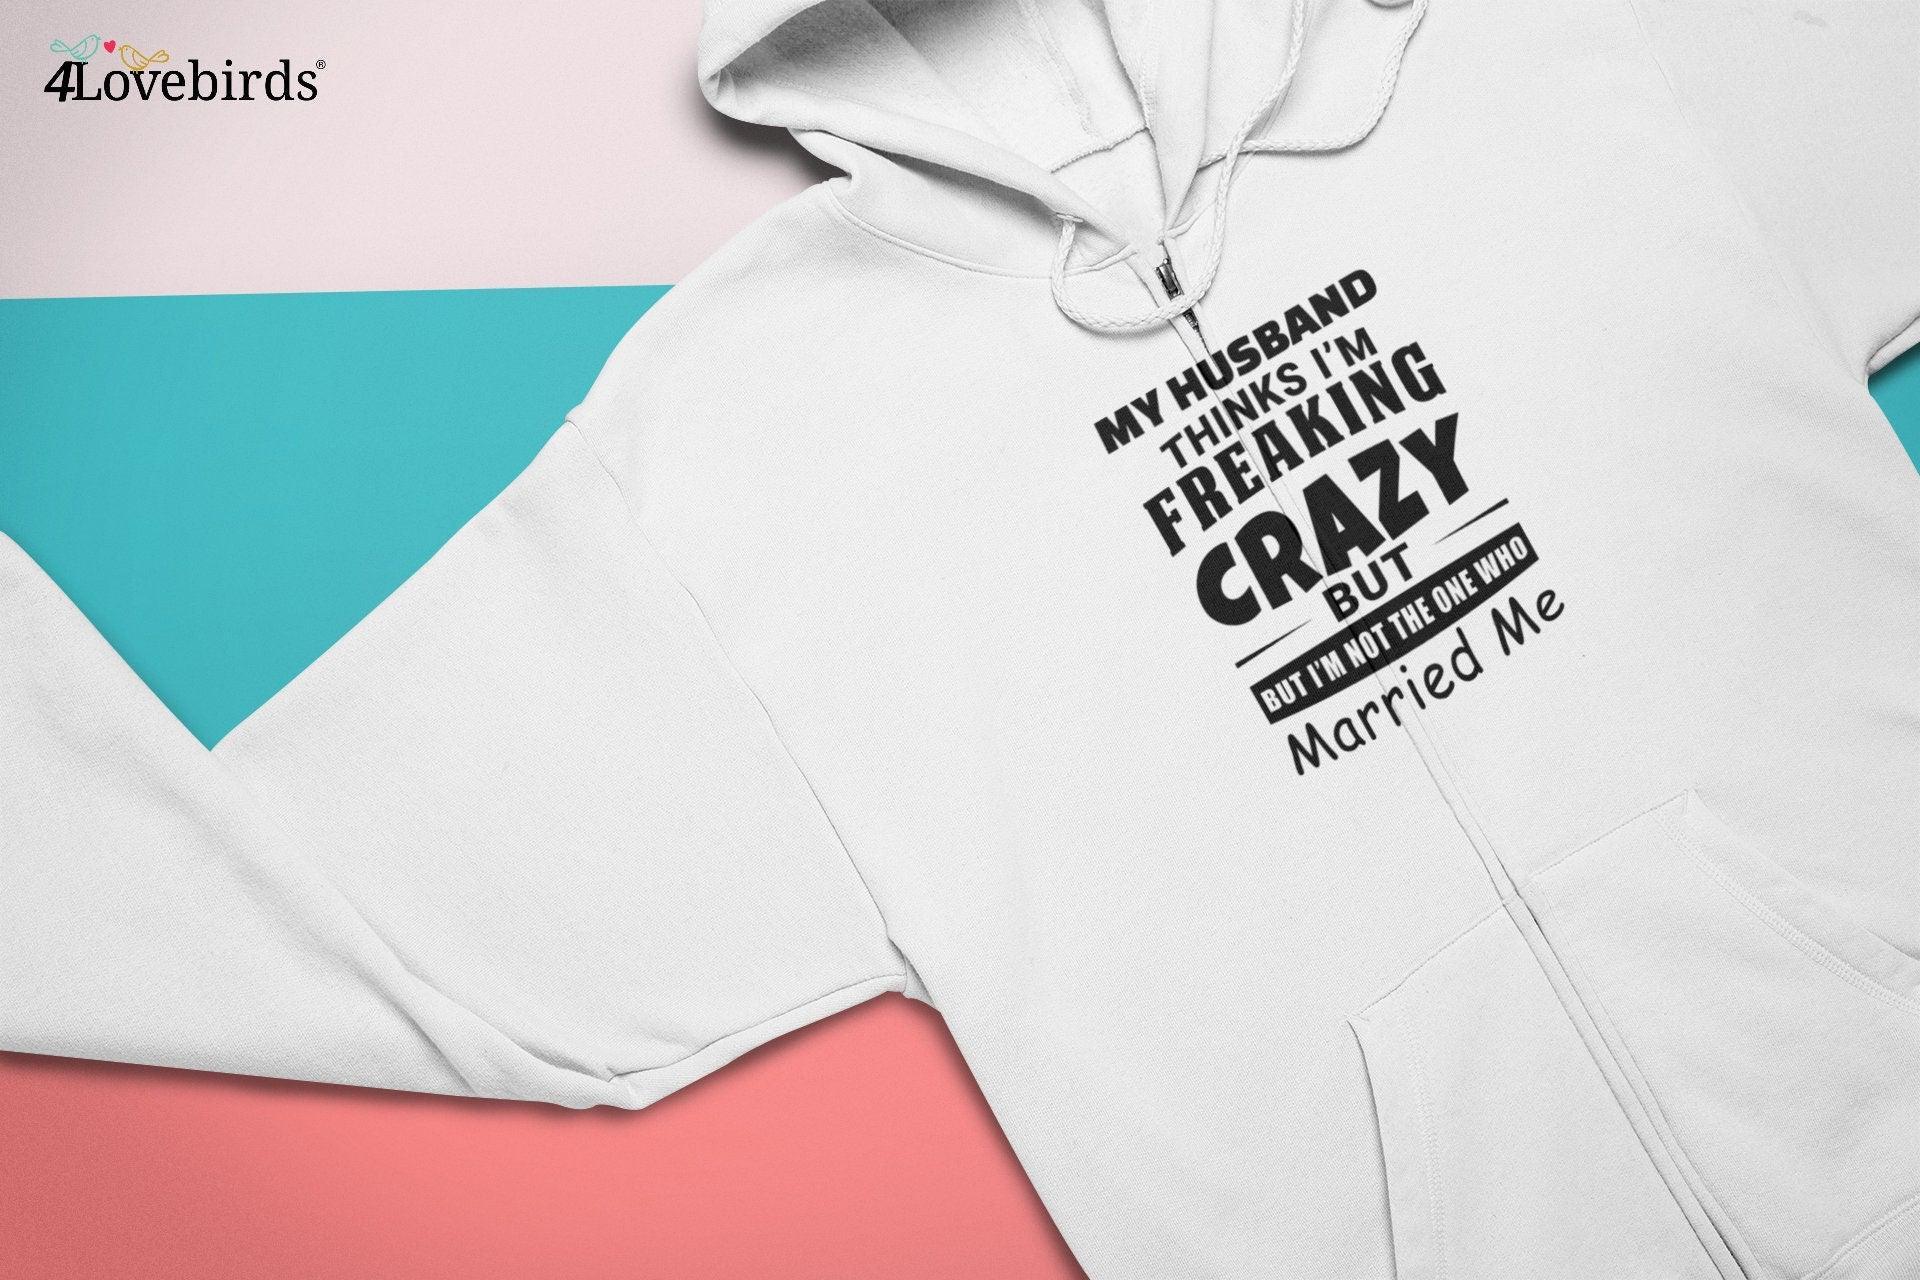 The husband / Wifey thinks I'm freaking crazy but I'm not the one who married me Hoodie, Funny matching T-shirt, Valentine Sweatshirt, - 4Lovebirds